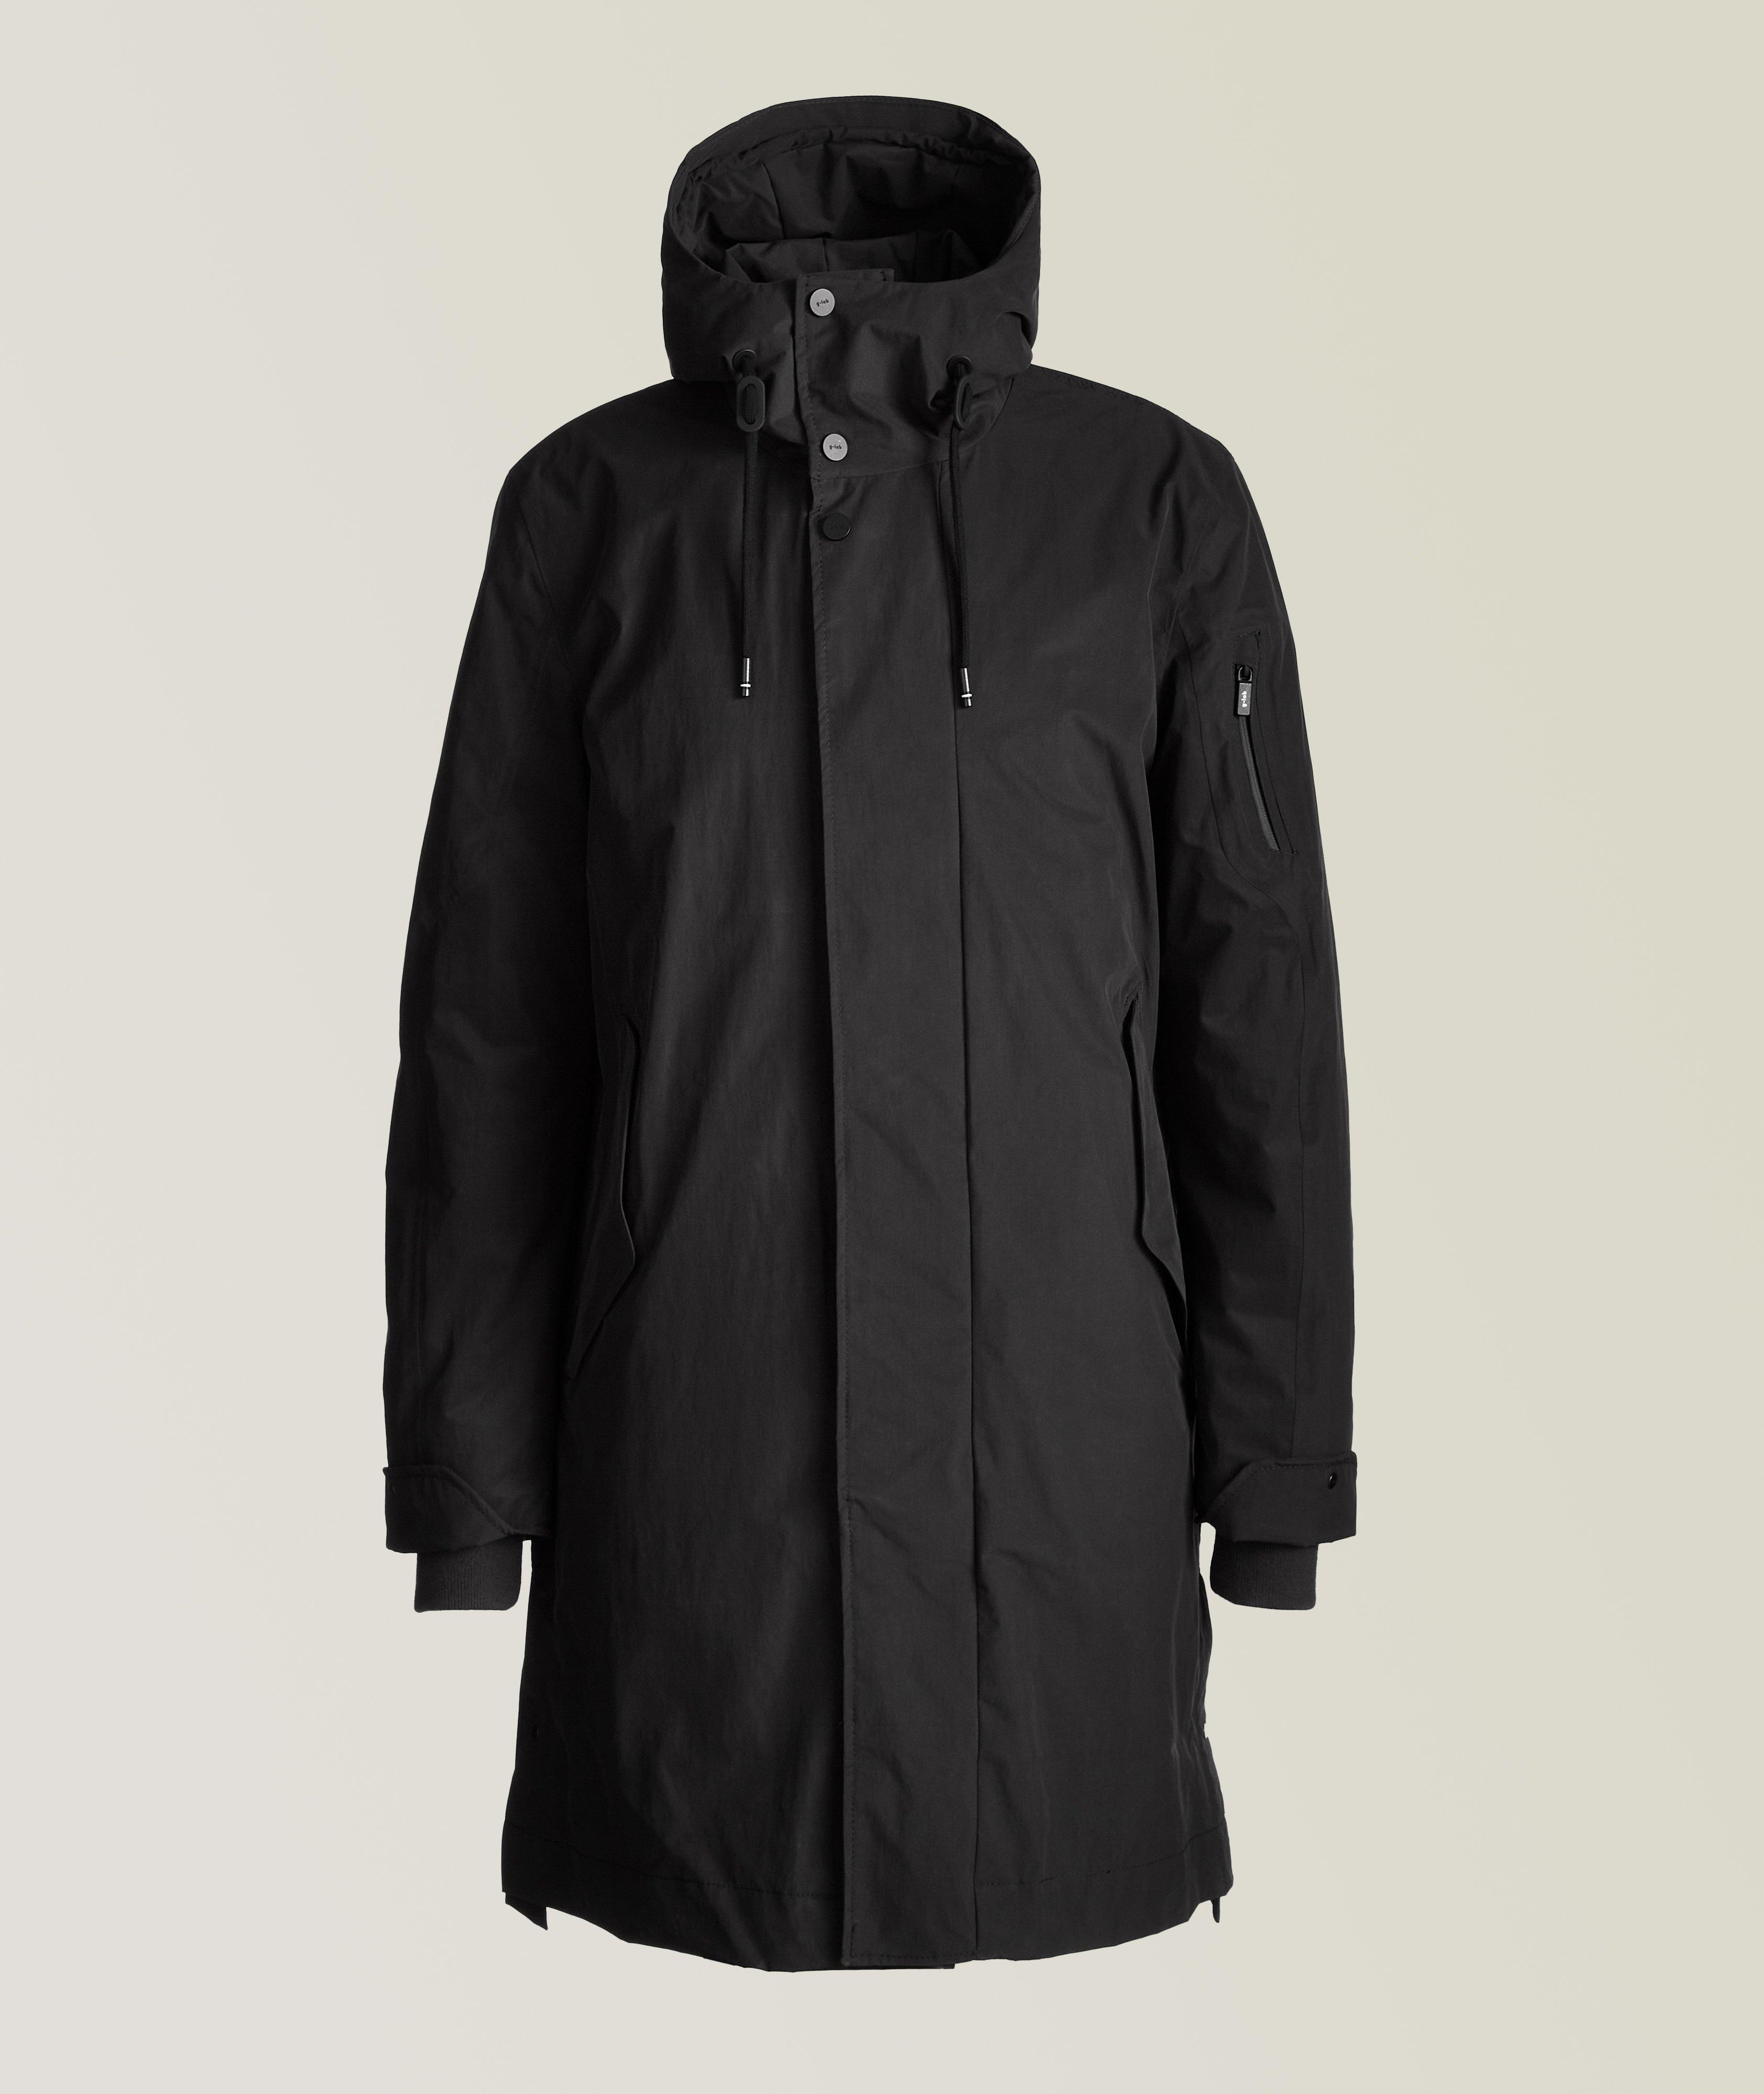 SHIELD Technical Hooded 3/4 Parka image 0